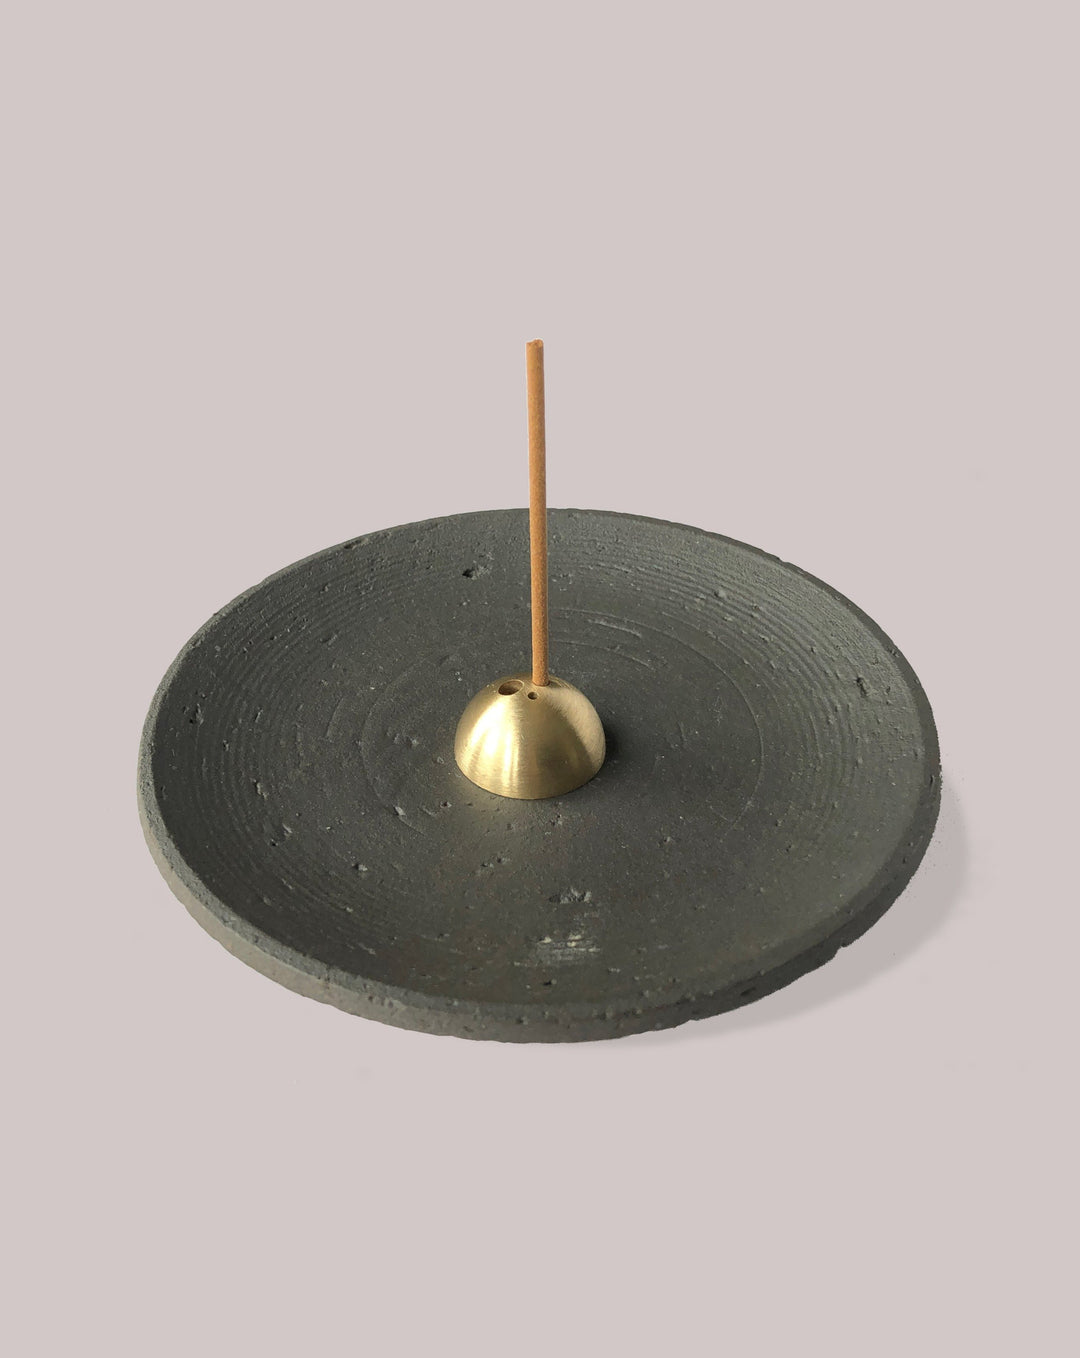 UME-COLLECTION INCENSE HOLDERS Incense Burner and Smudging Dish - Raw Black.